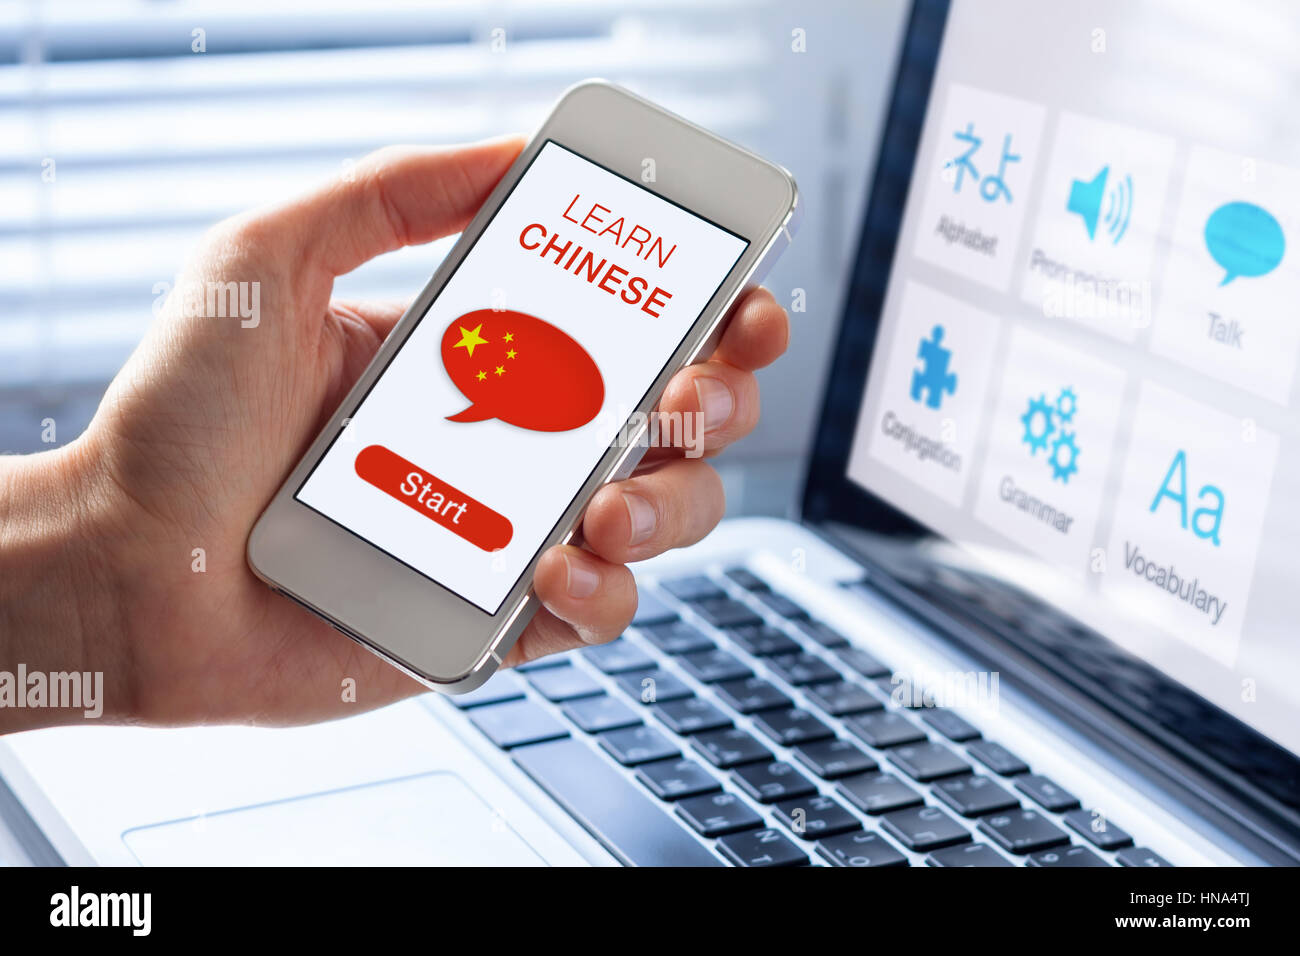 Learn Mandarin Chinese language online concept with a person showing e-learning app on mobile phone with the flag of China Stock Photo